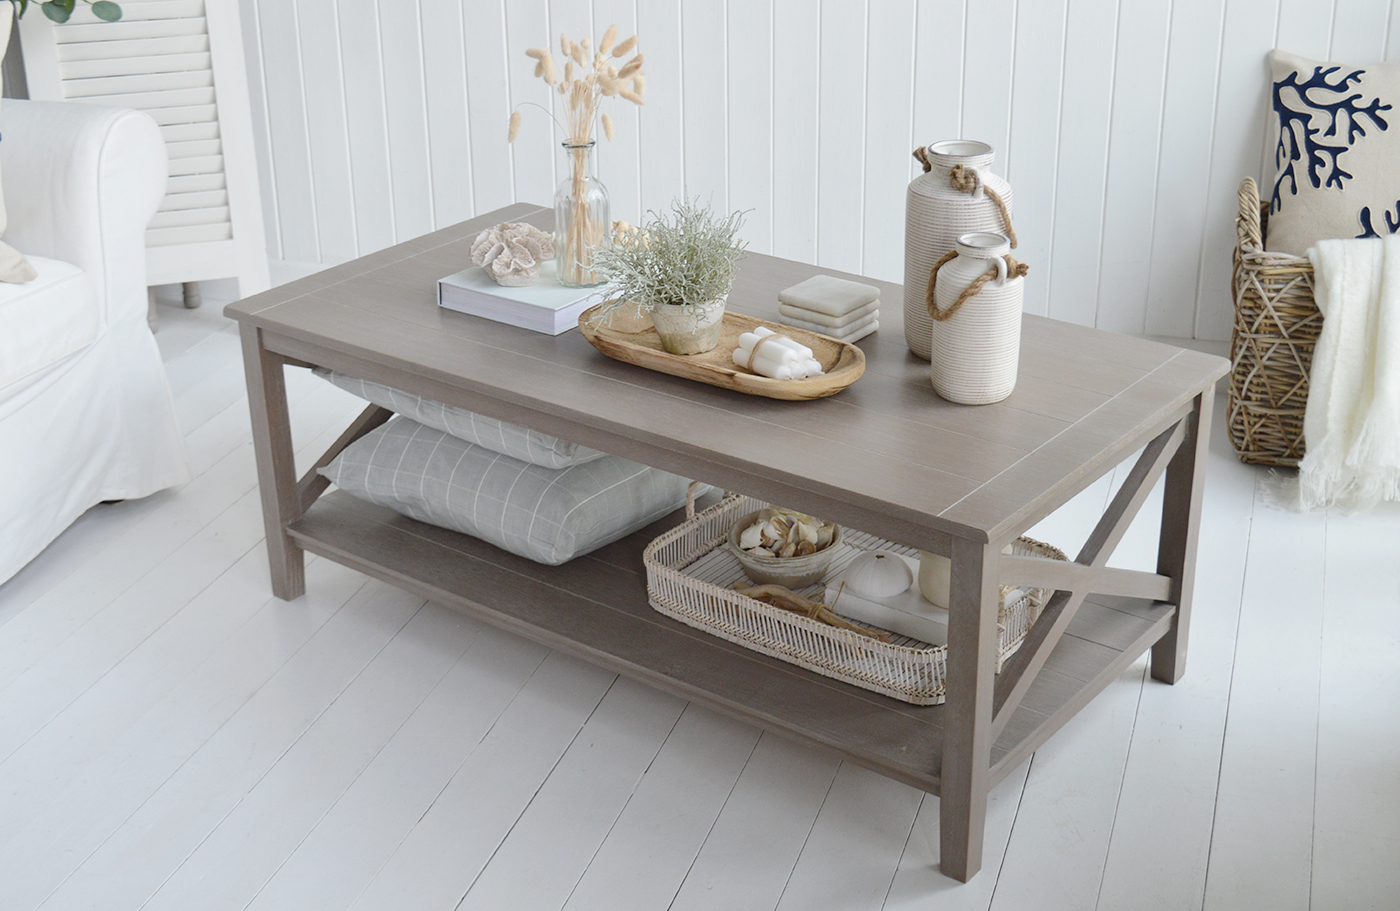 Cambridge Coffee Table in a driftwood grey coloured finish - New England Interiors Furniture for Coastal, Modern Farmhouse and Country Homes